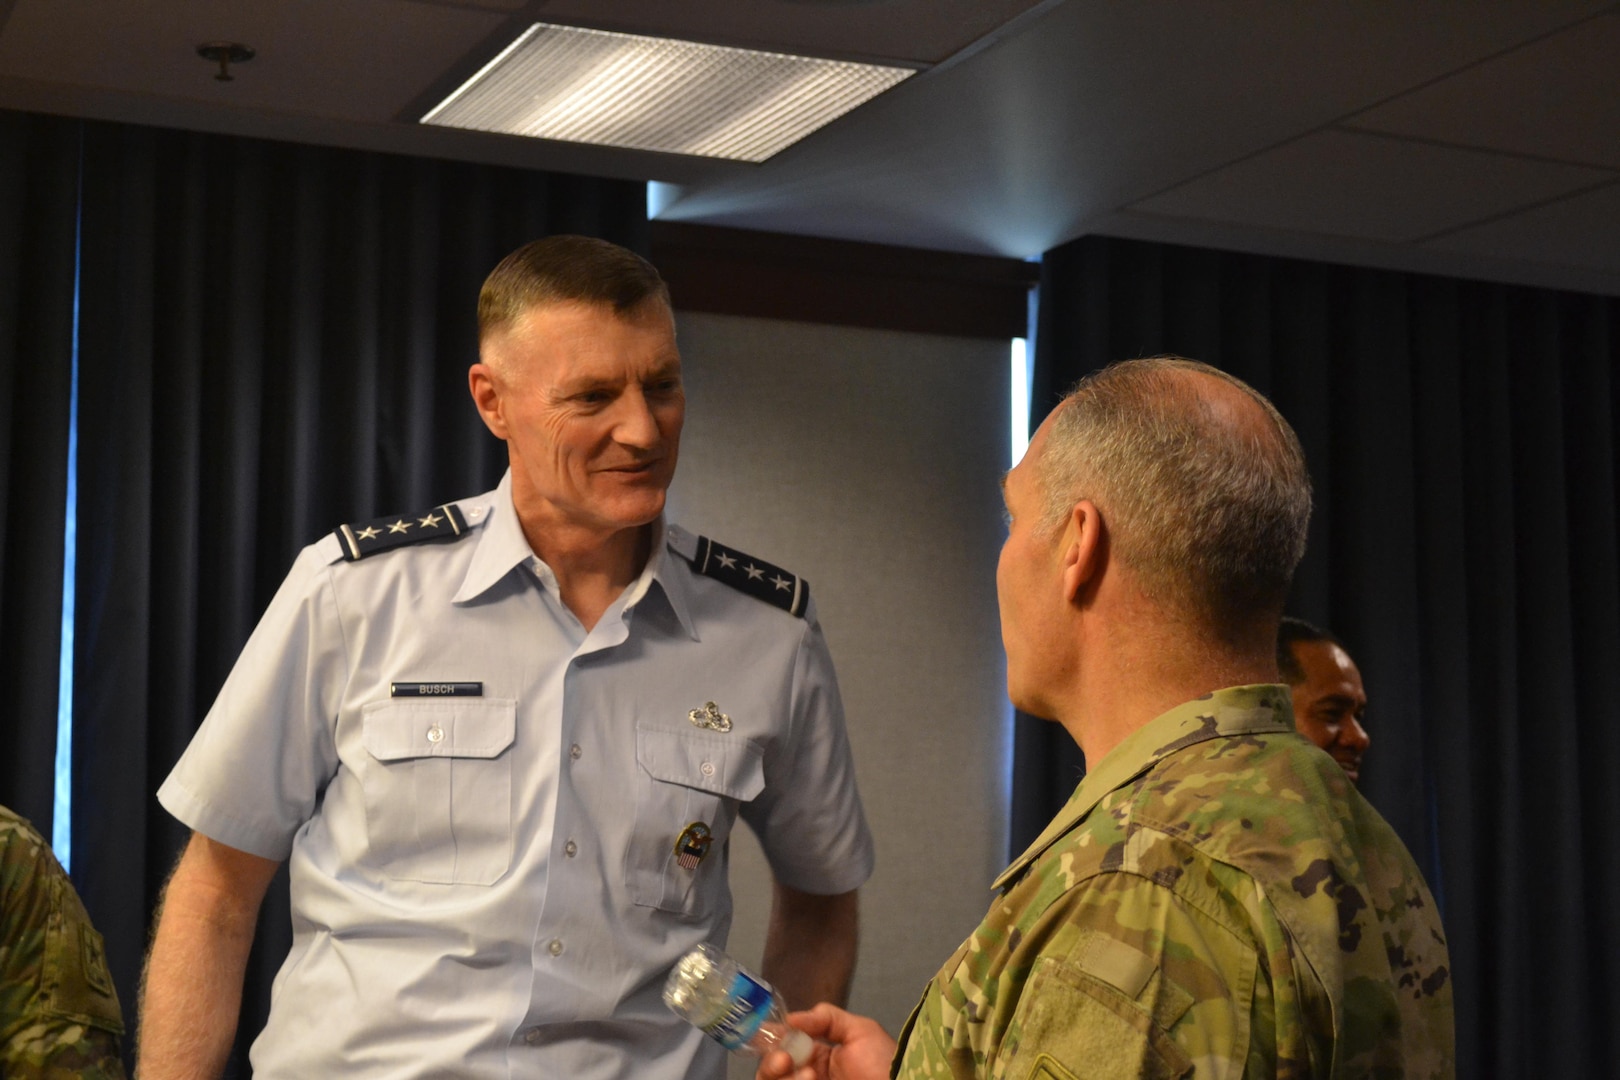 Air Force Lt. Gen. Andy Busch and Army Lt. Gen. Gustave Perna converse during a break at the Army/DLA Day, Sept. 8 at the Pentagon.